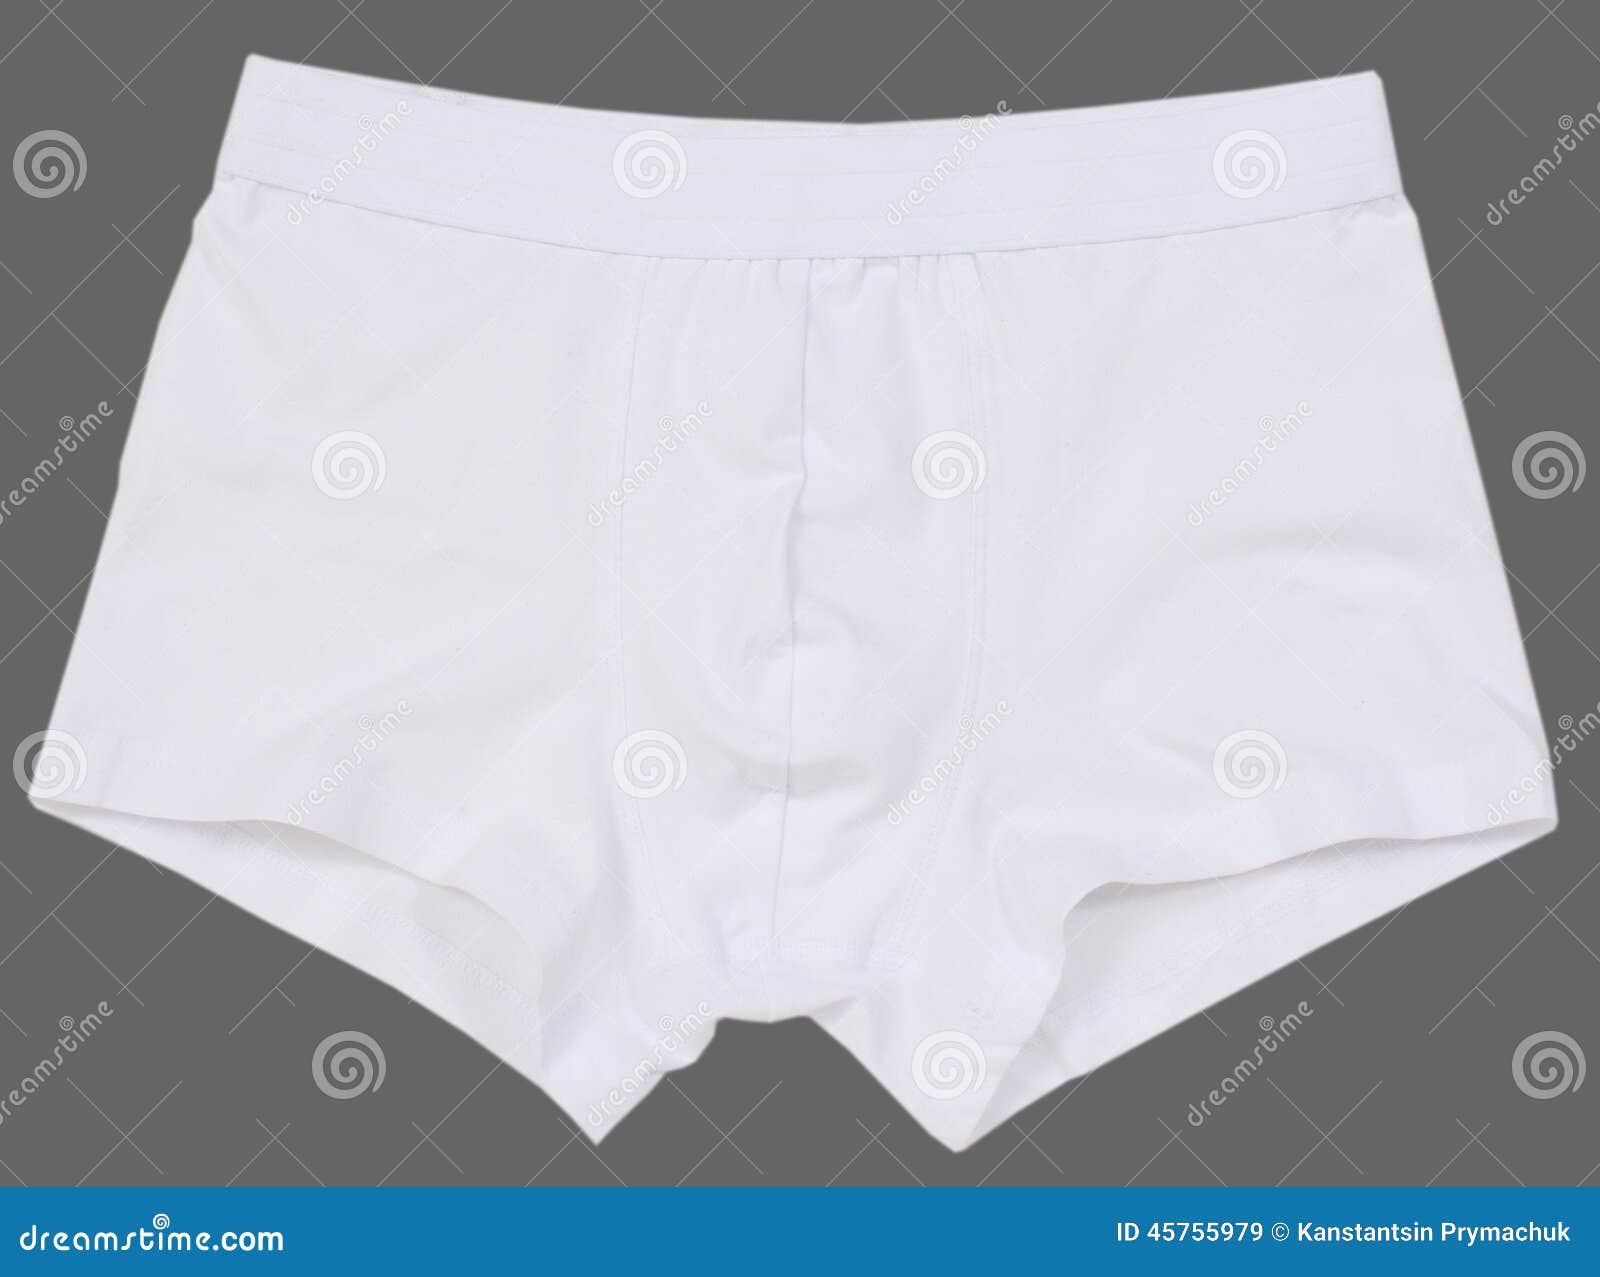 Male Underwear Isolated on Gray Background Stock Image - Image of ...